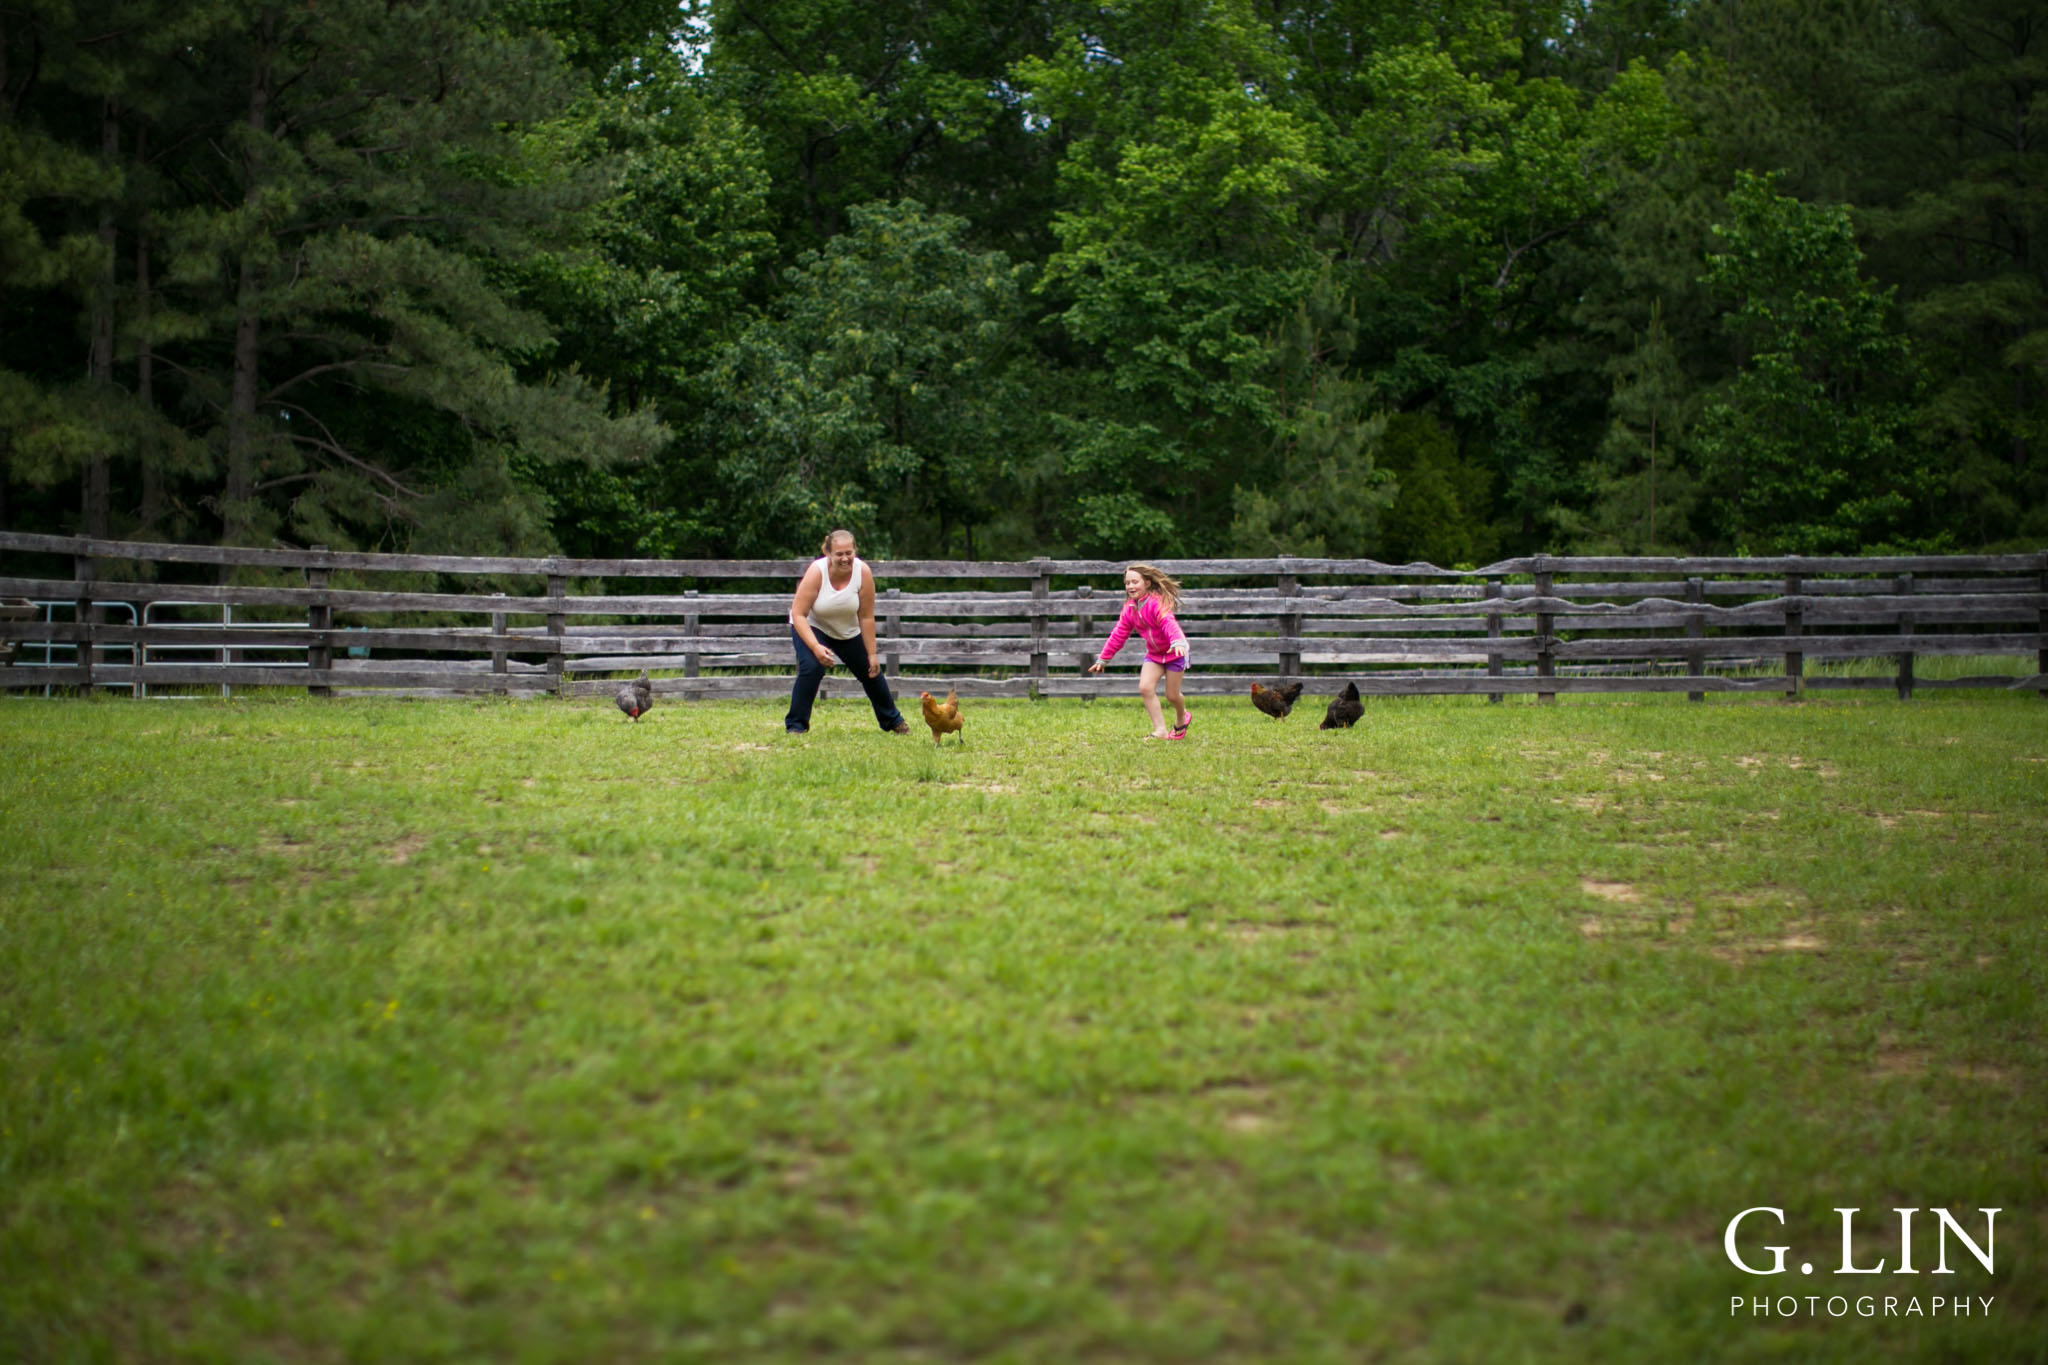 G. Lin Photography | Raleigh Event Photographer | Woman and girl on farm chasing chickens